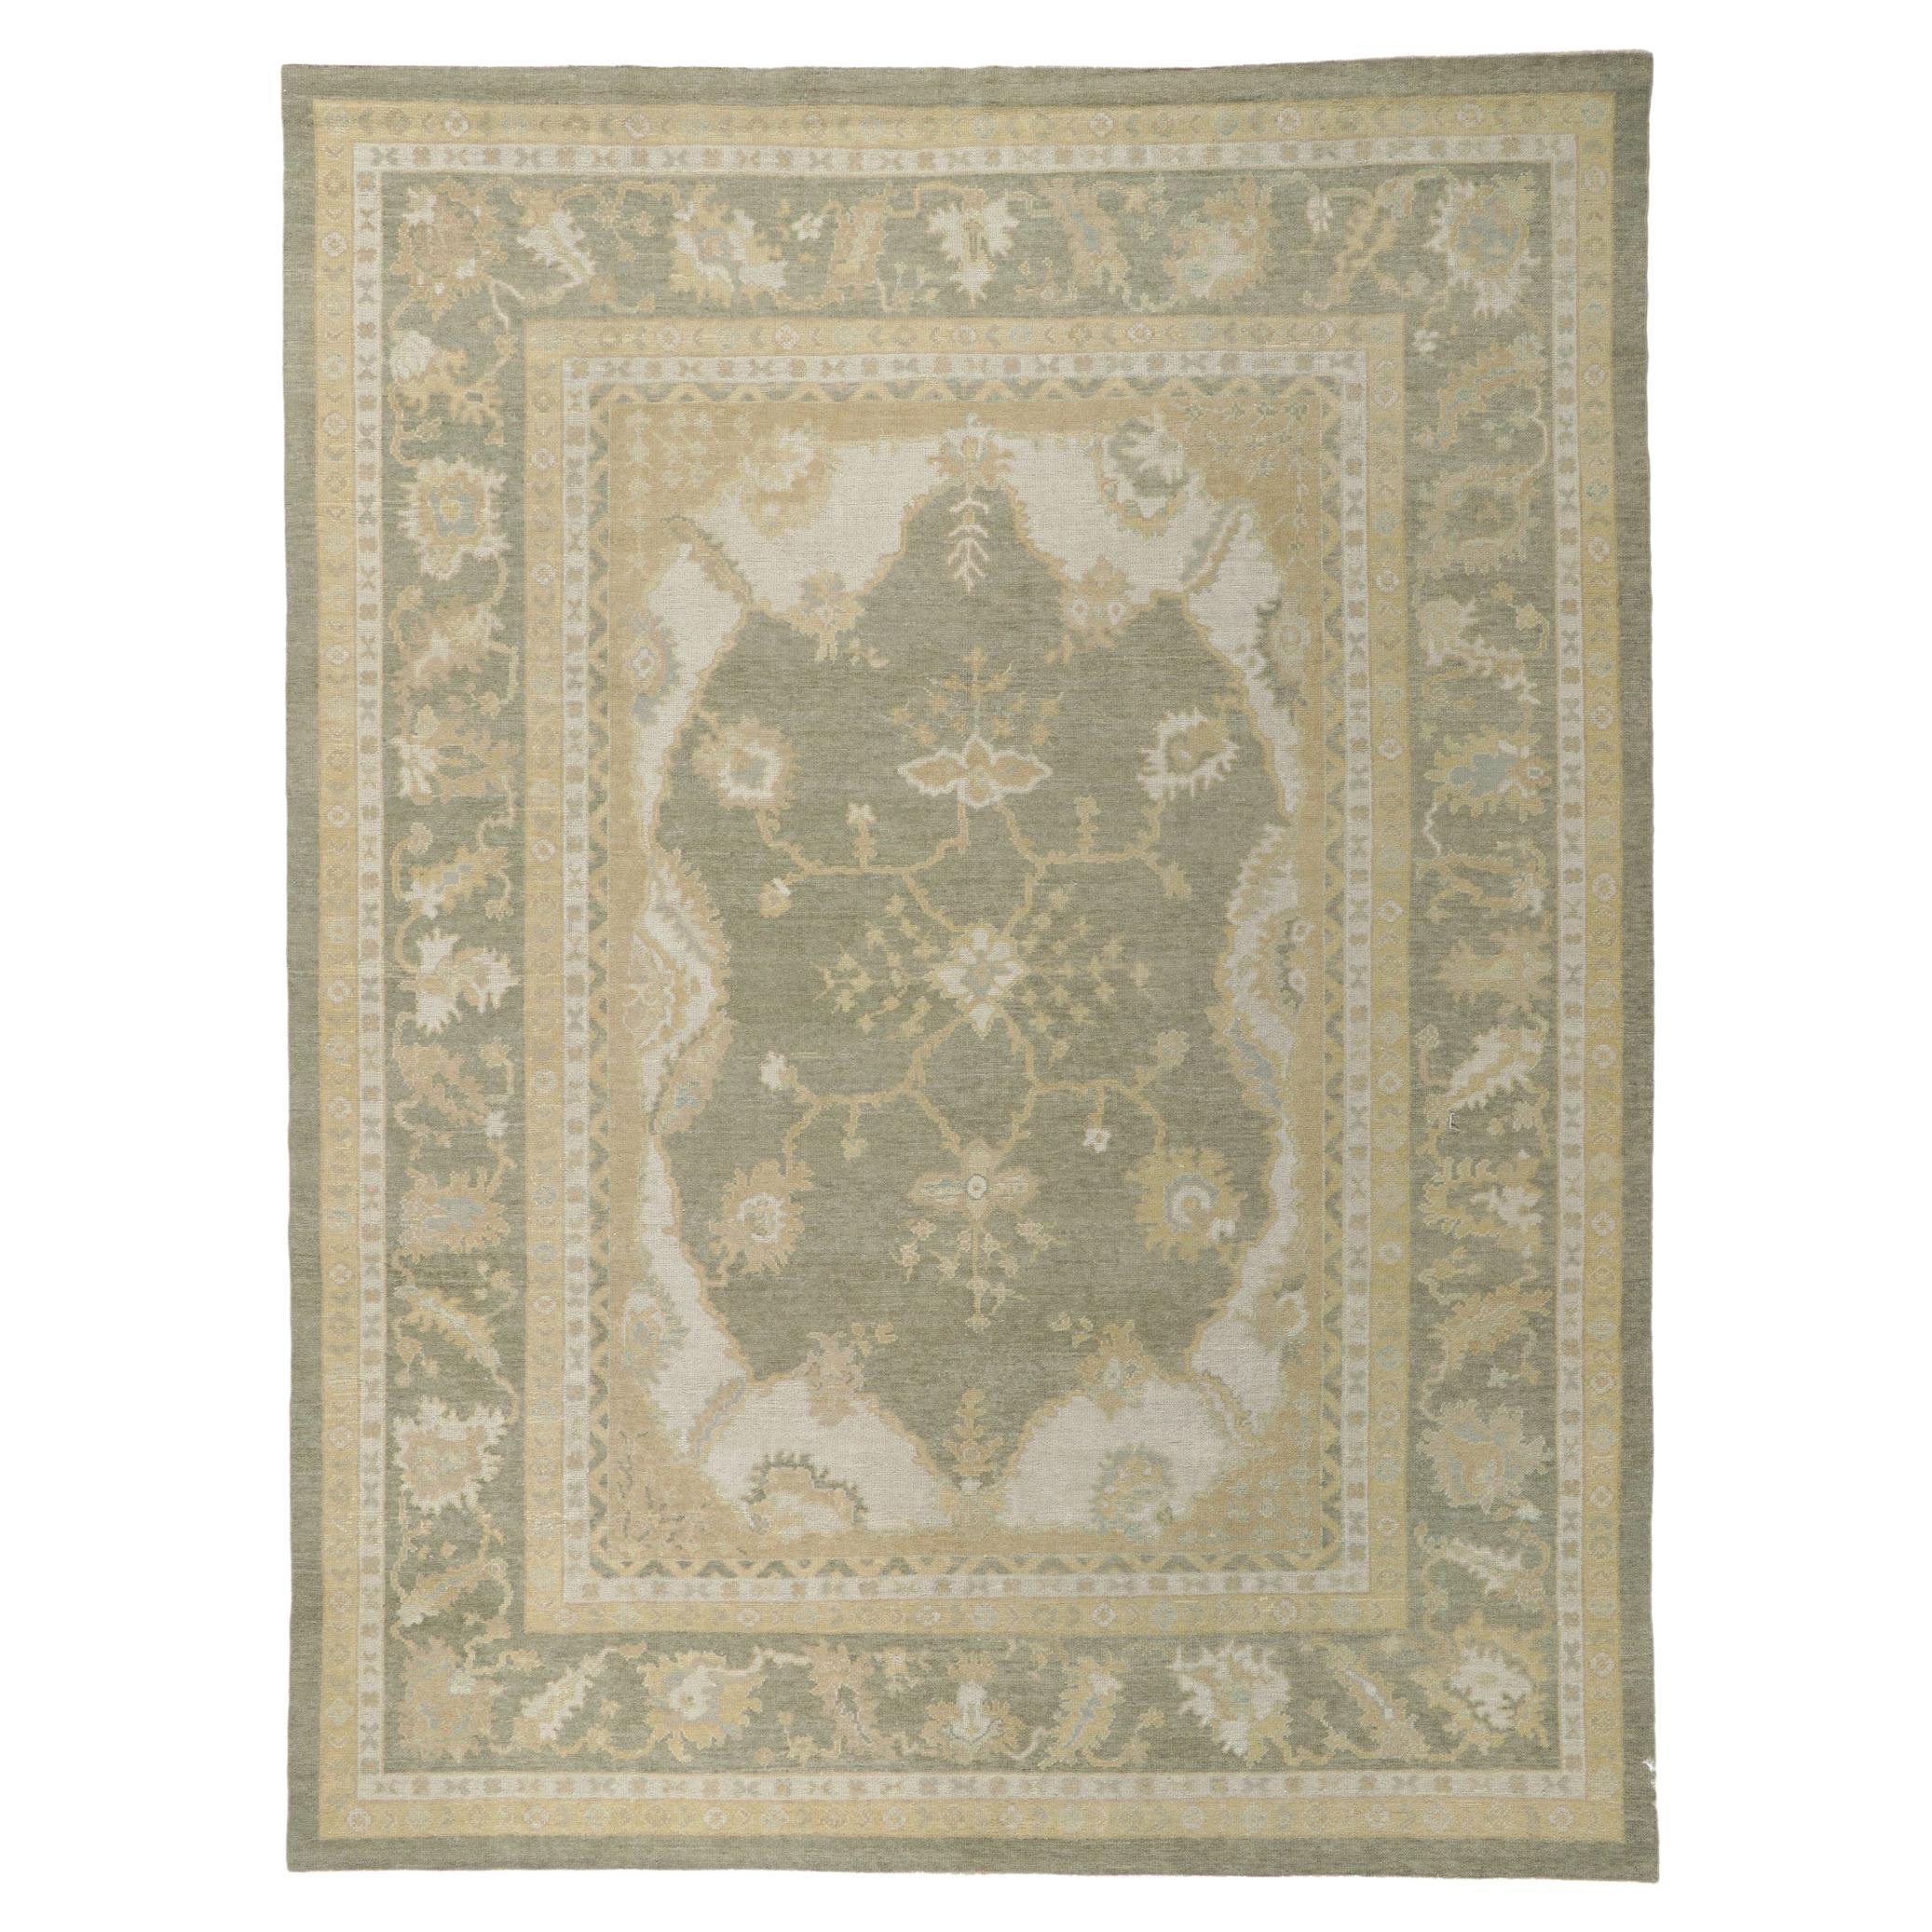 New Contemporary Oushak Rug with Modern Traditional Style